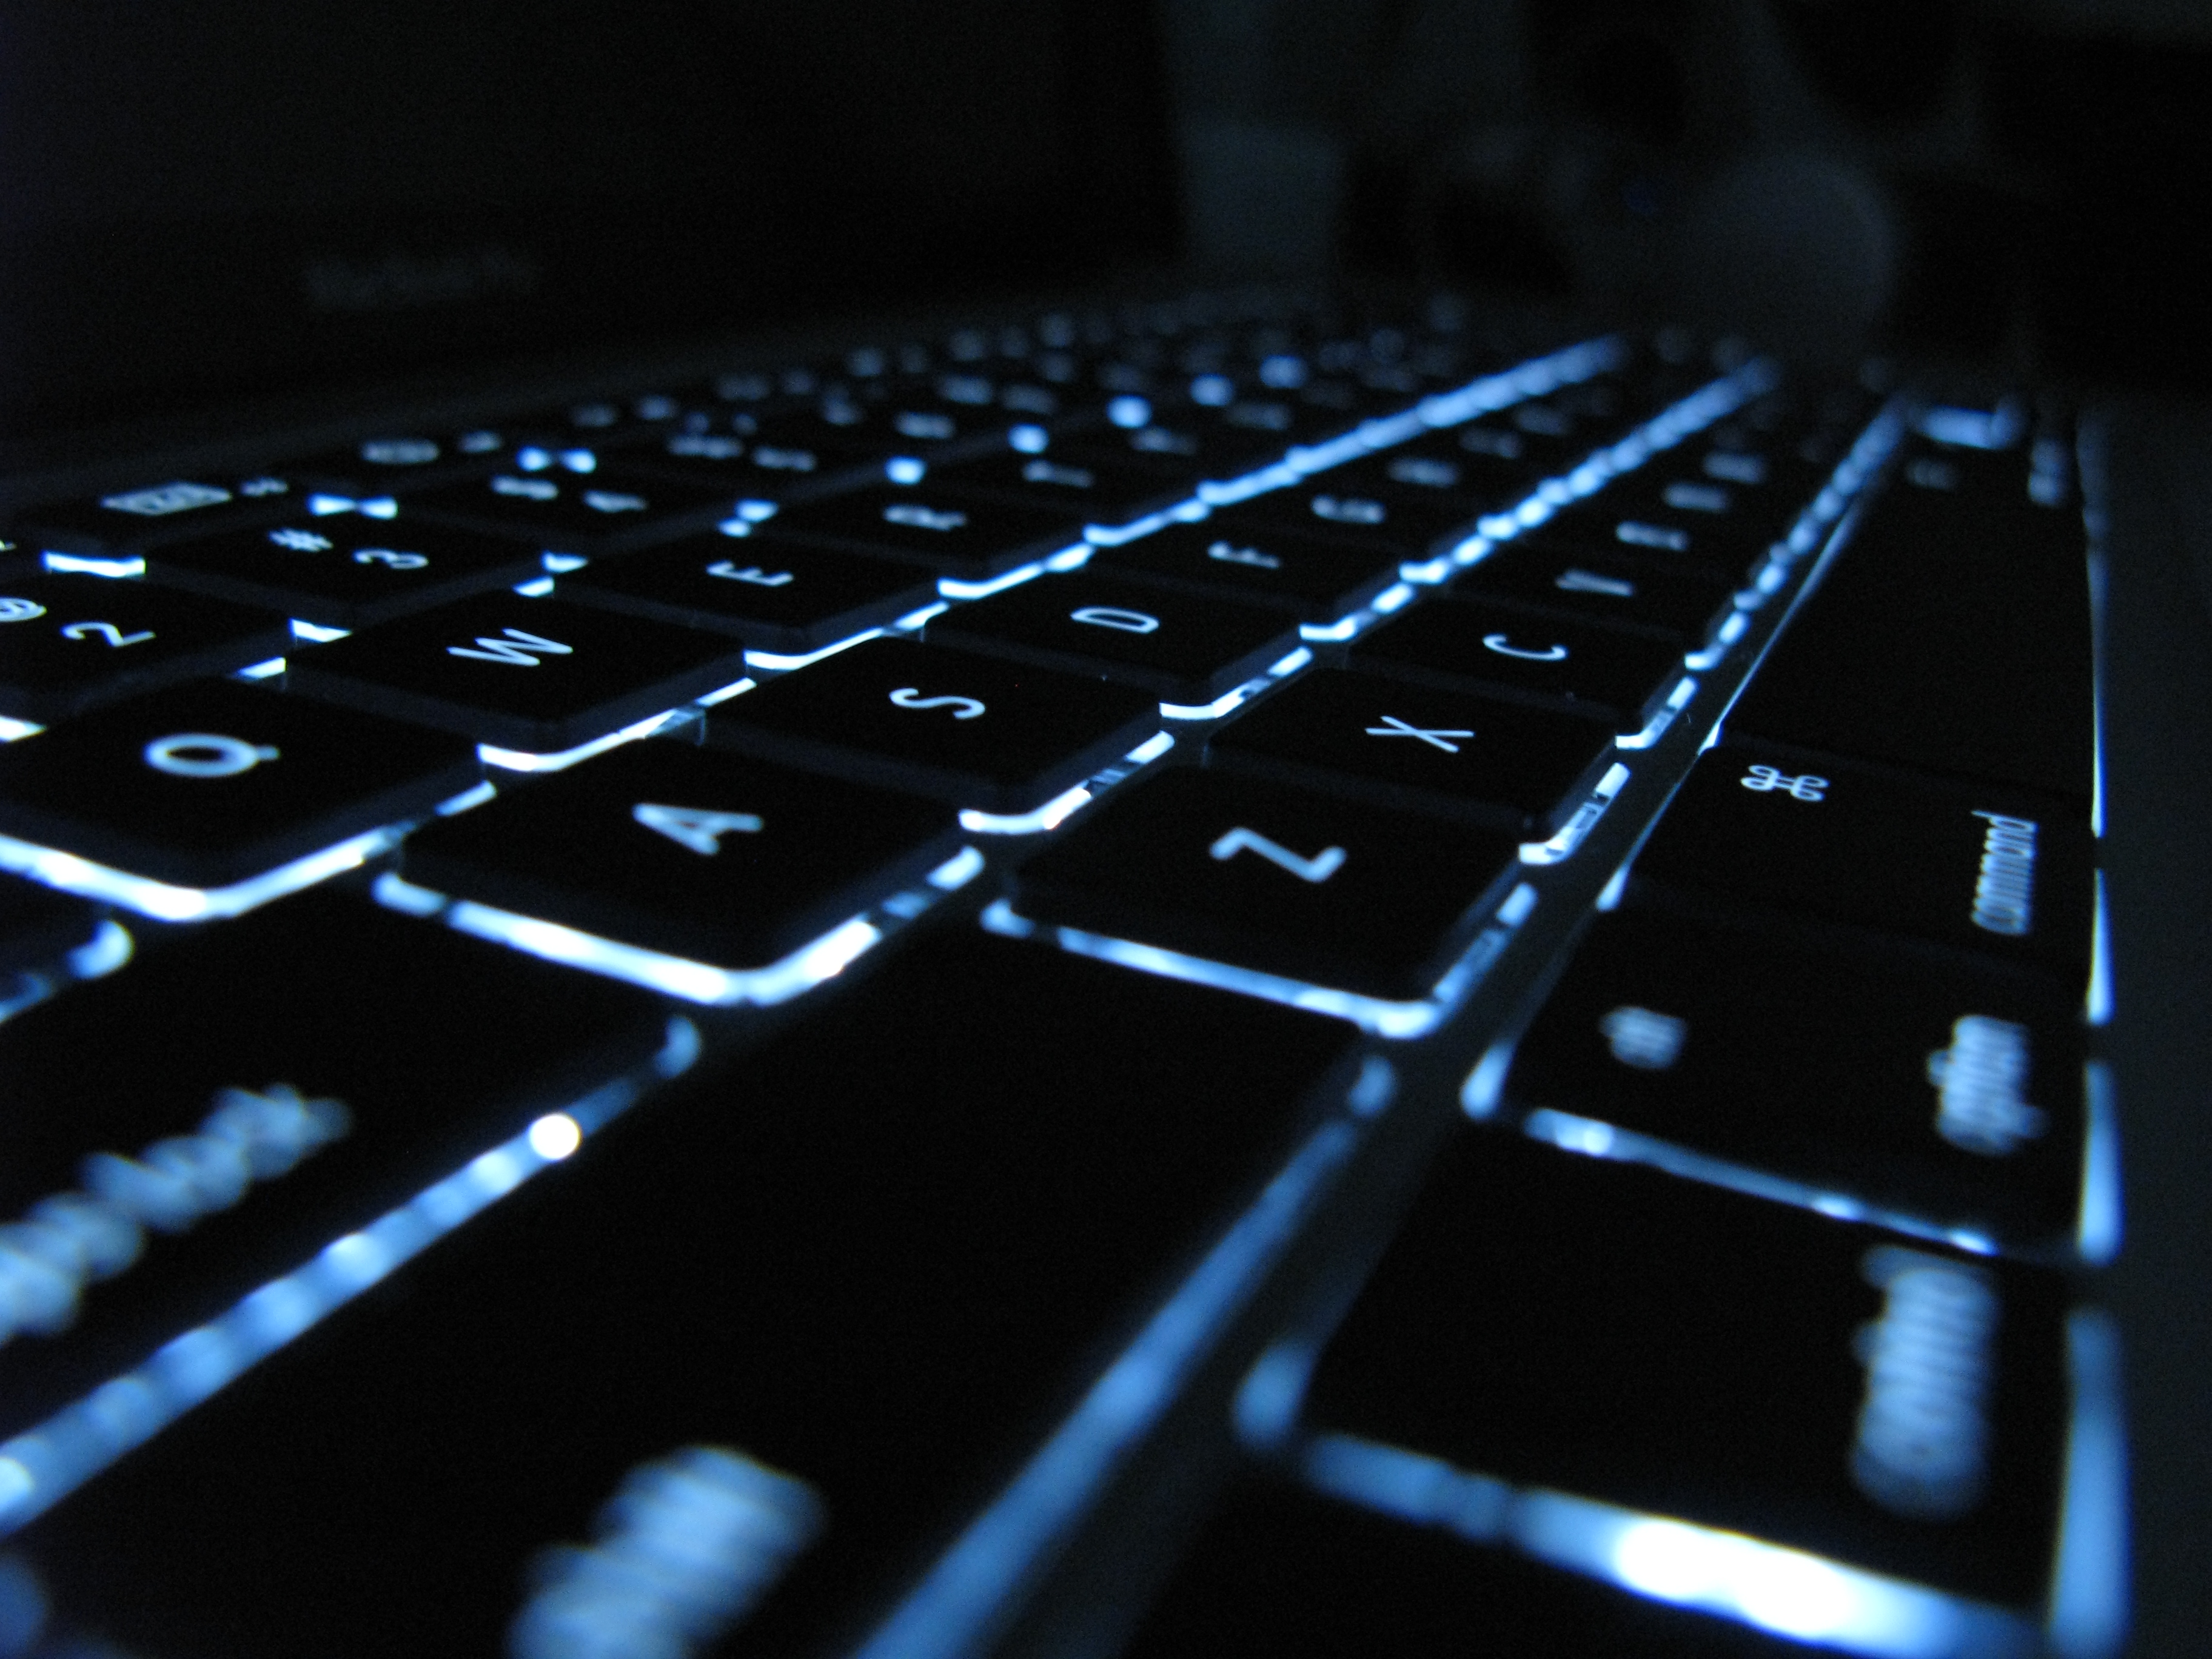 Online Chinese hacking forums offer 'black hat' training courses for low prices. Photo: eGuidry/Flickr